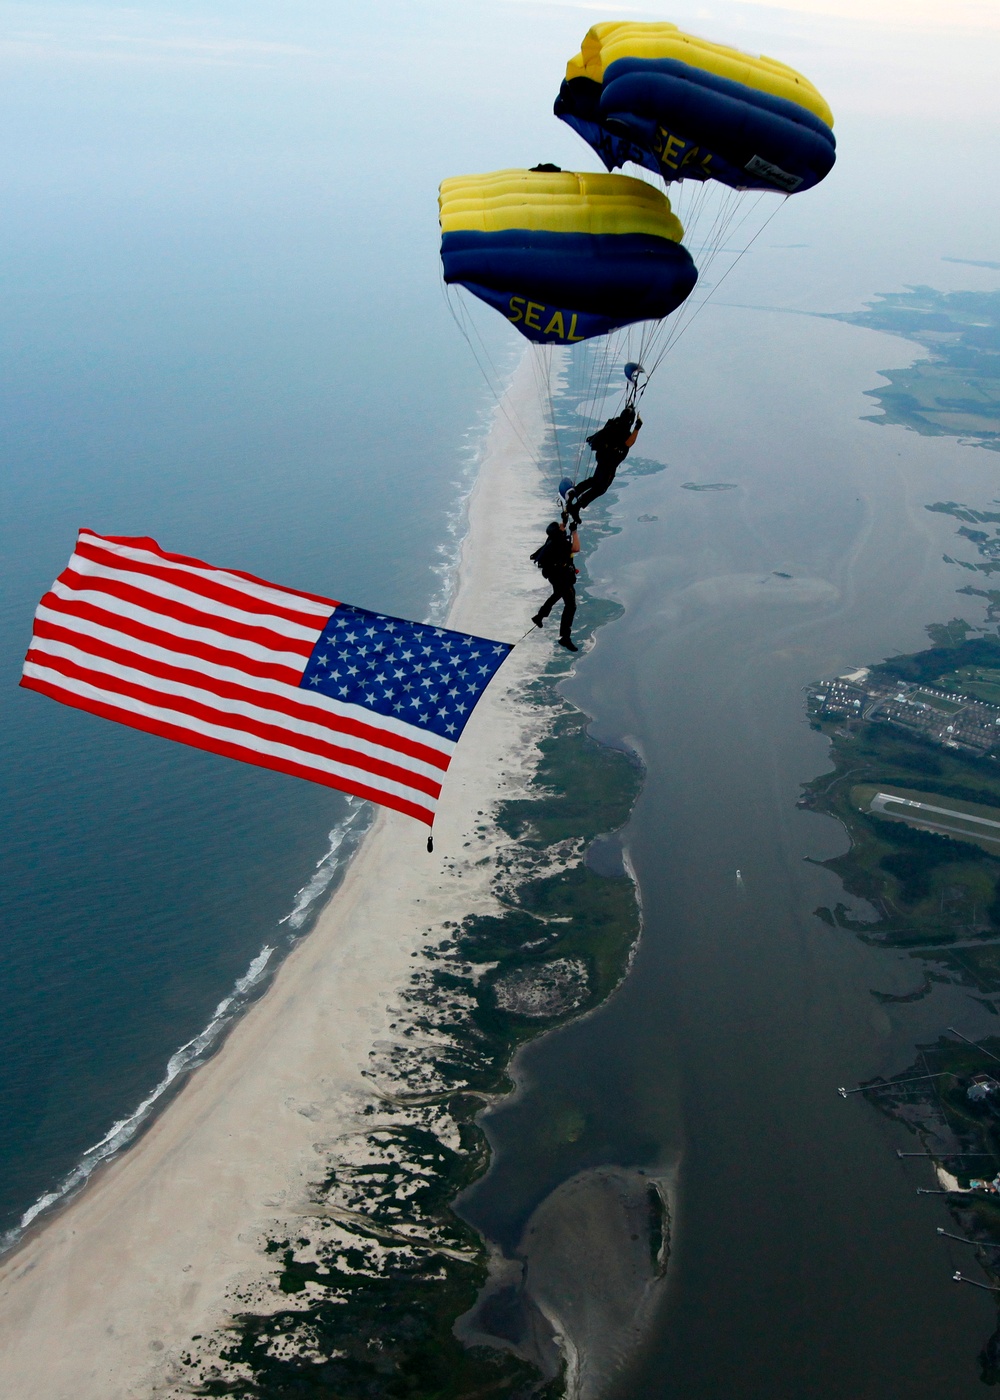 DVIDS Images Leap Frogs perform for the Ocean City Air Show [Image